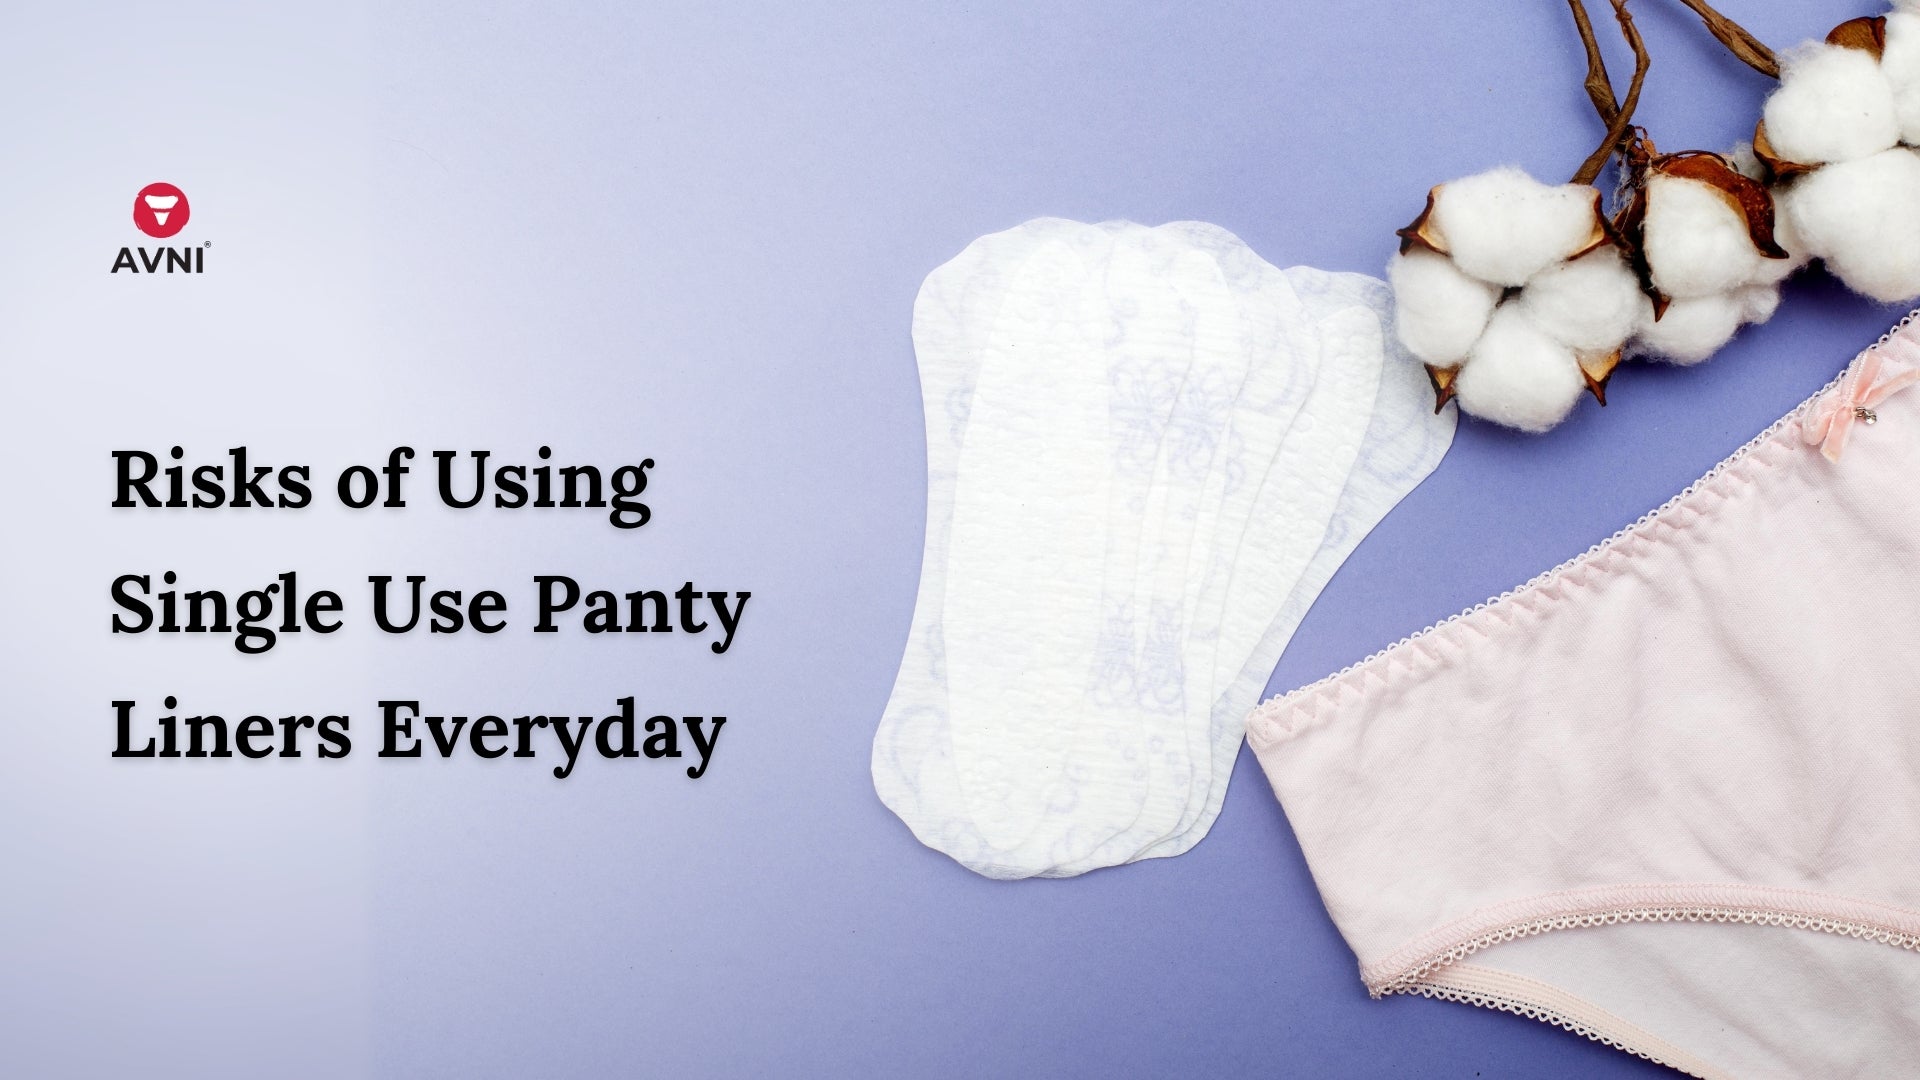 Risks of Using Single Use Panty Liners Everyday